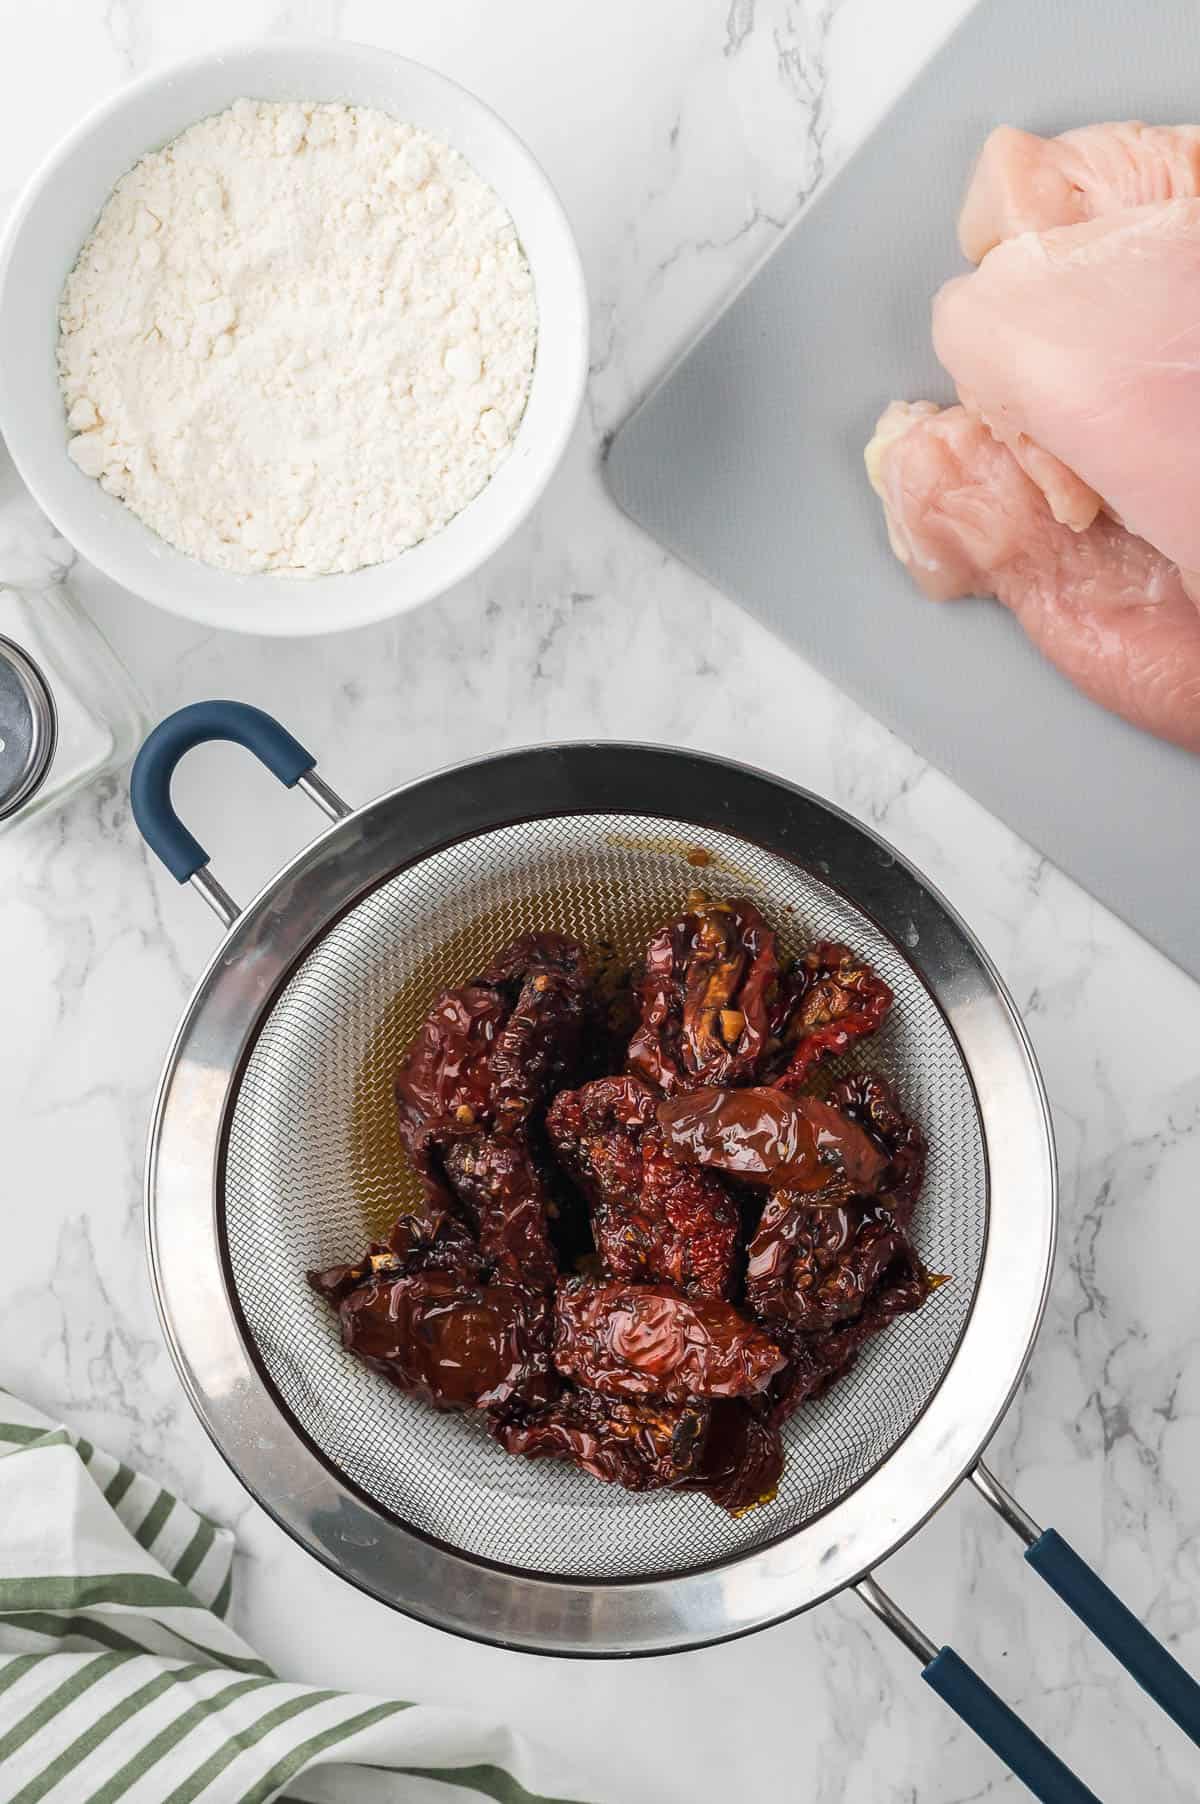 straining sundried tomatoes from oil.